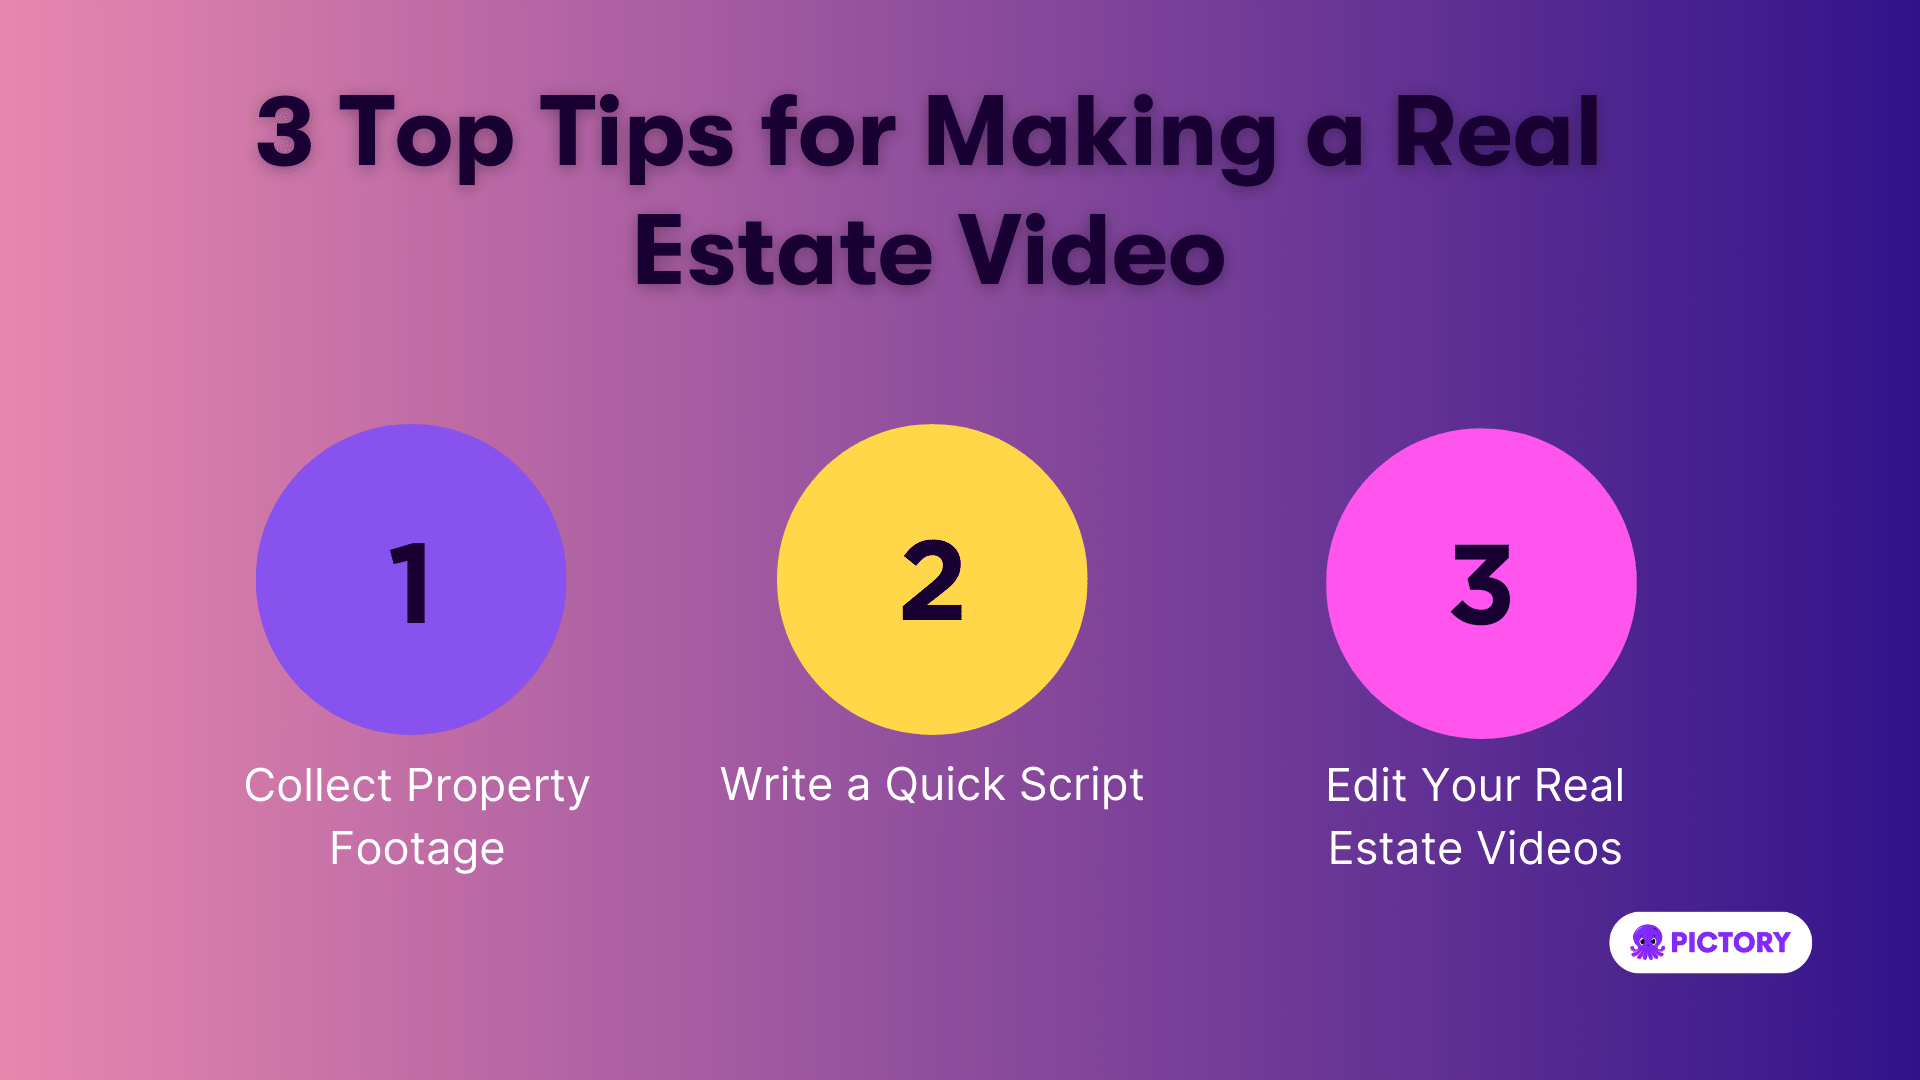 3 Top Tips for Making Your Real Estate Video